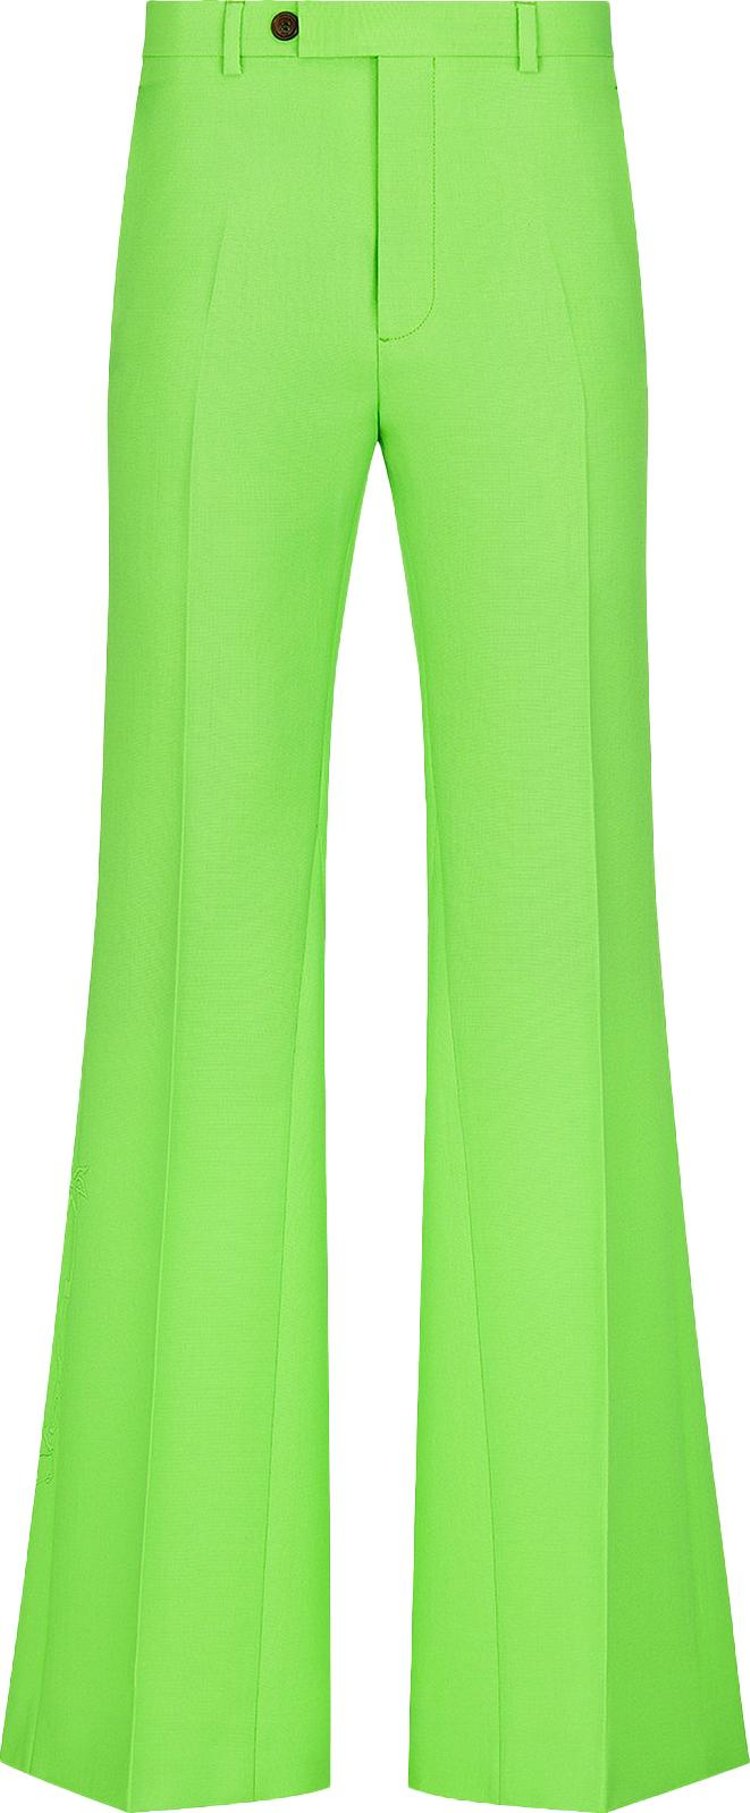 Dior x Cactus Jack Flared Pants 'Fluorescent Green'